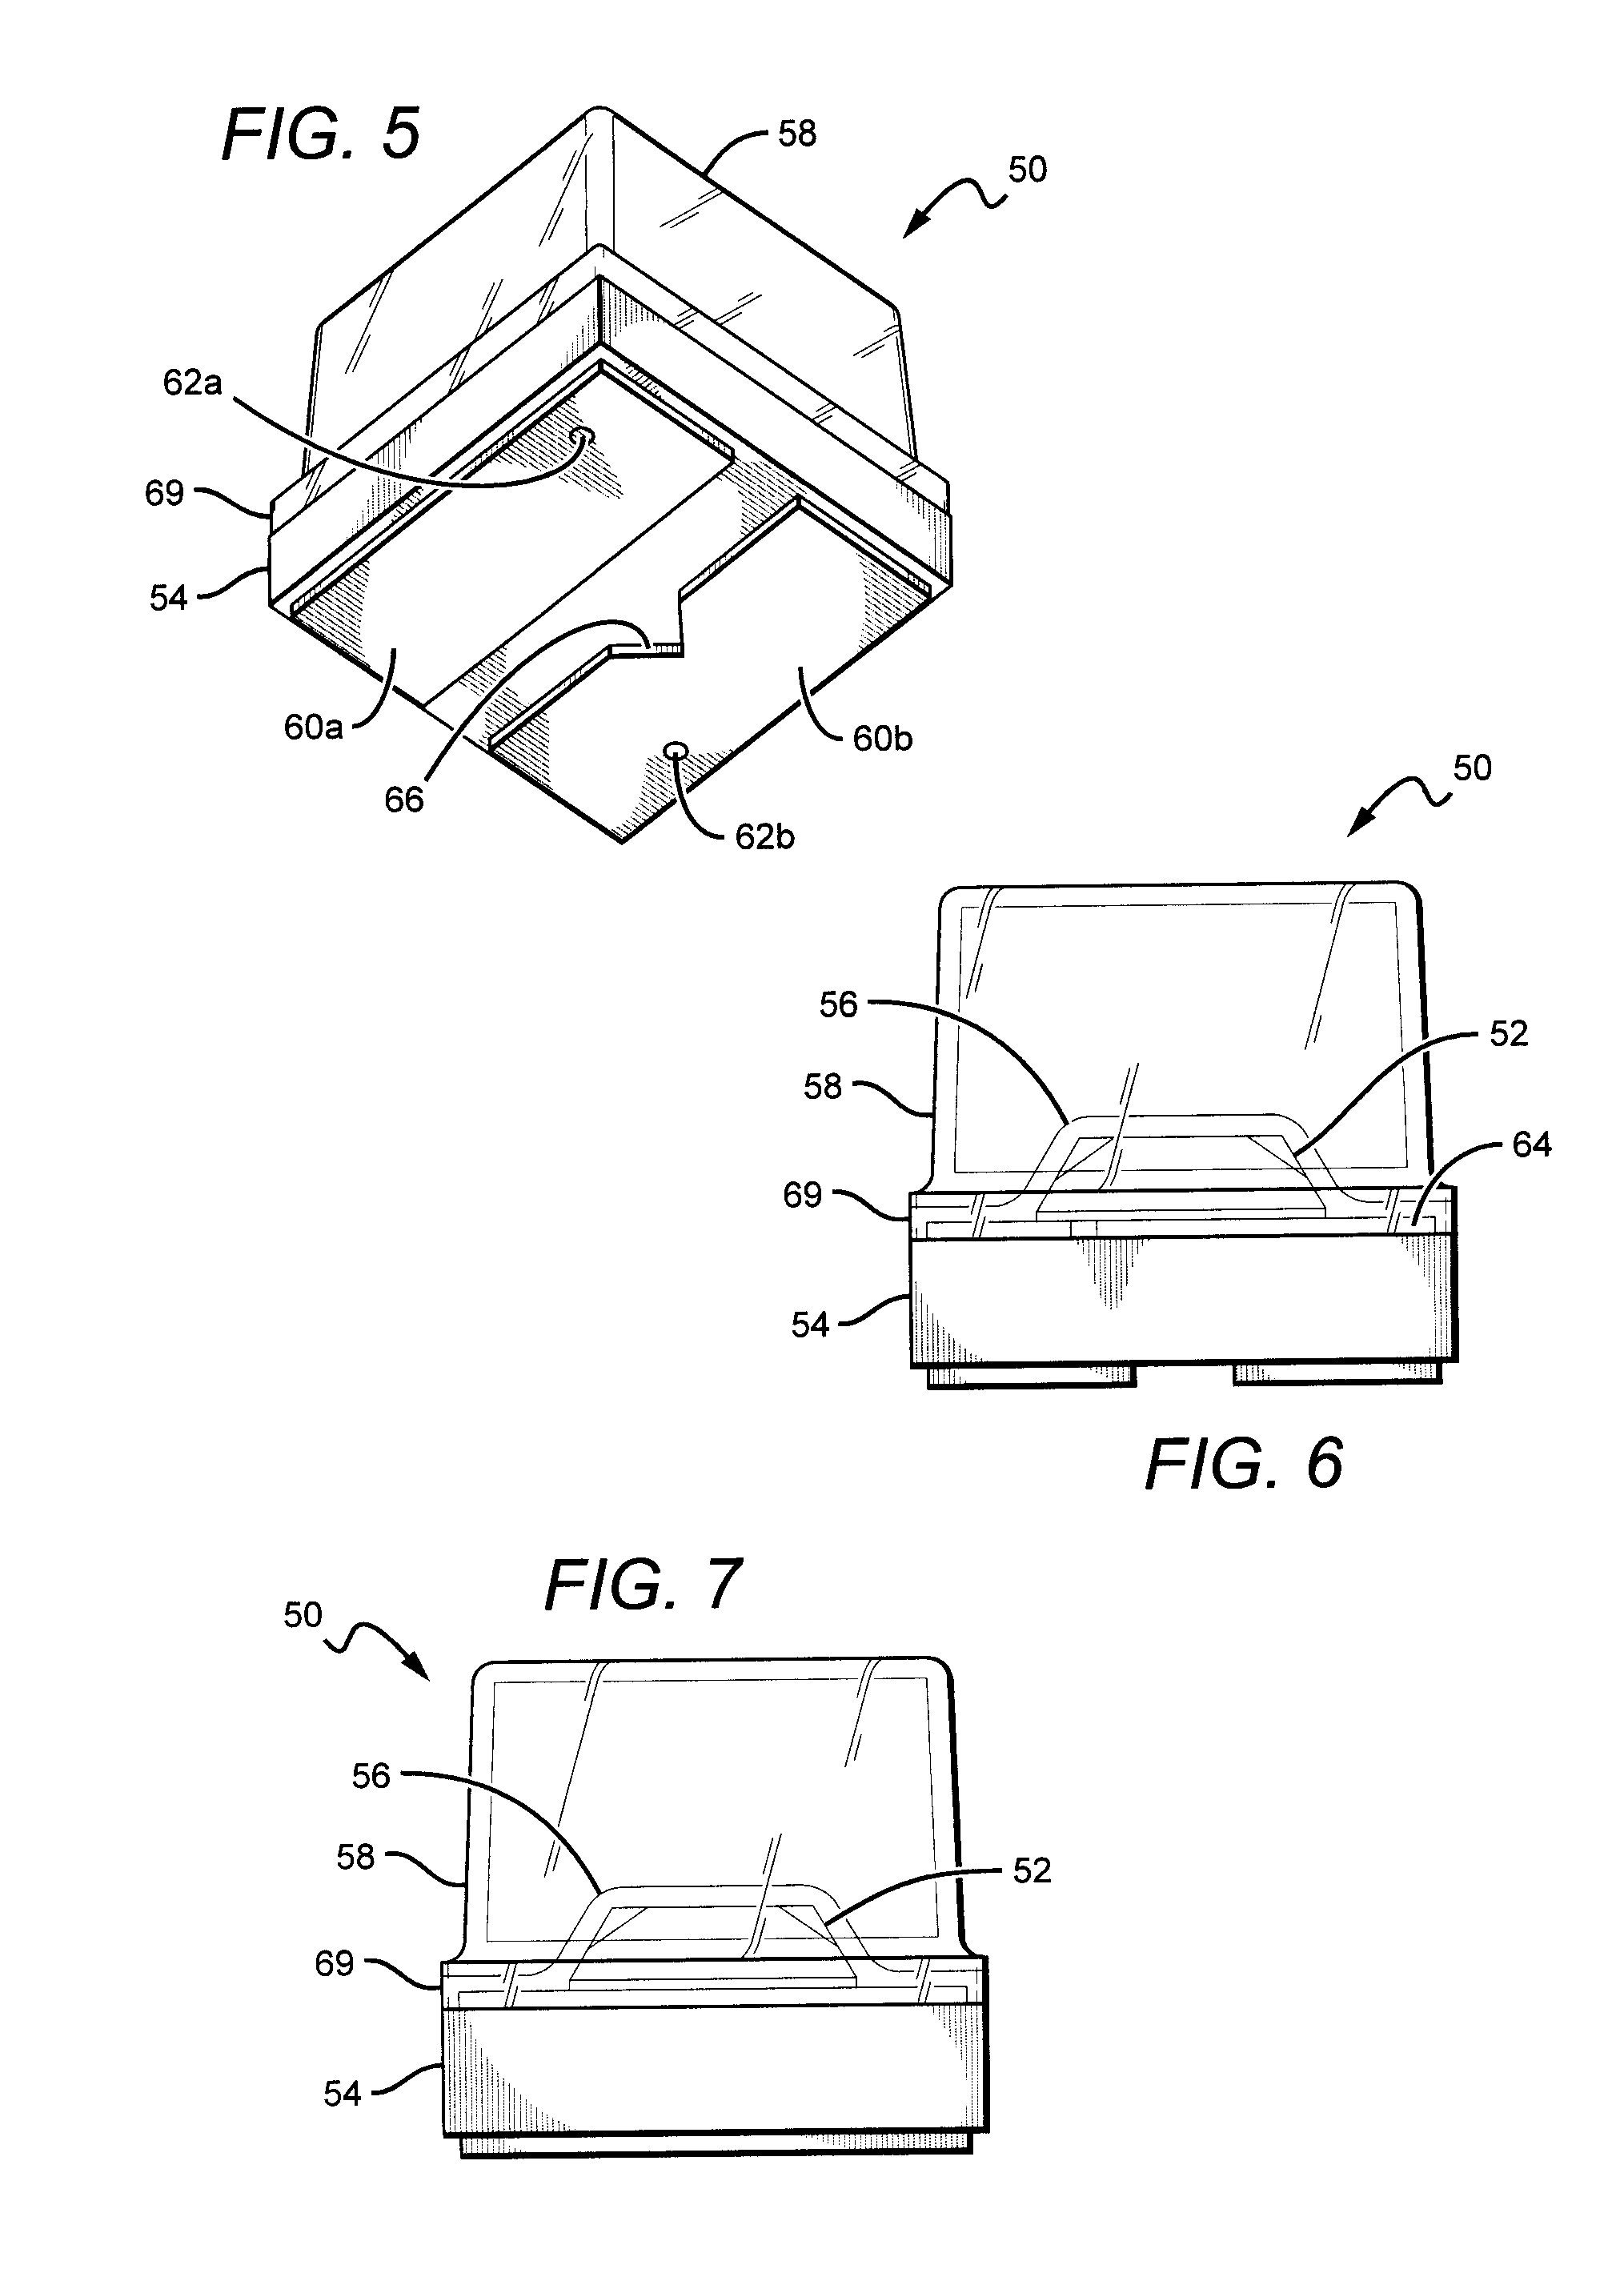 LED package with multiple element light source and encapsulant having planar surfaces